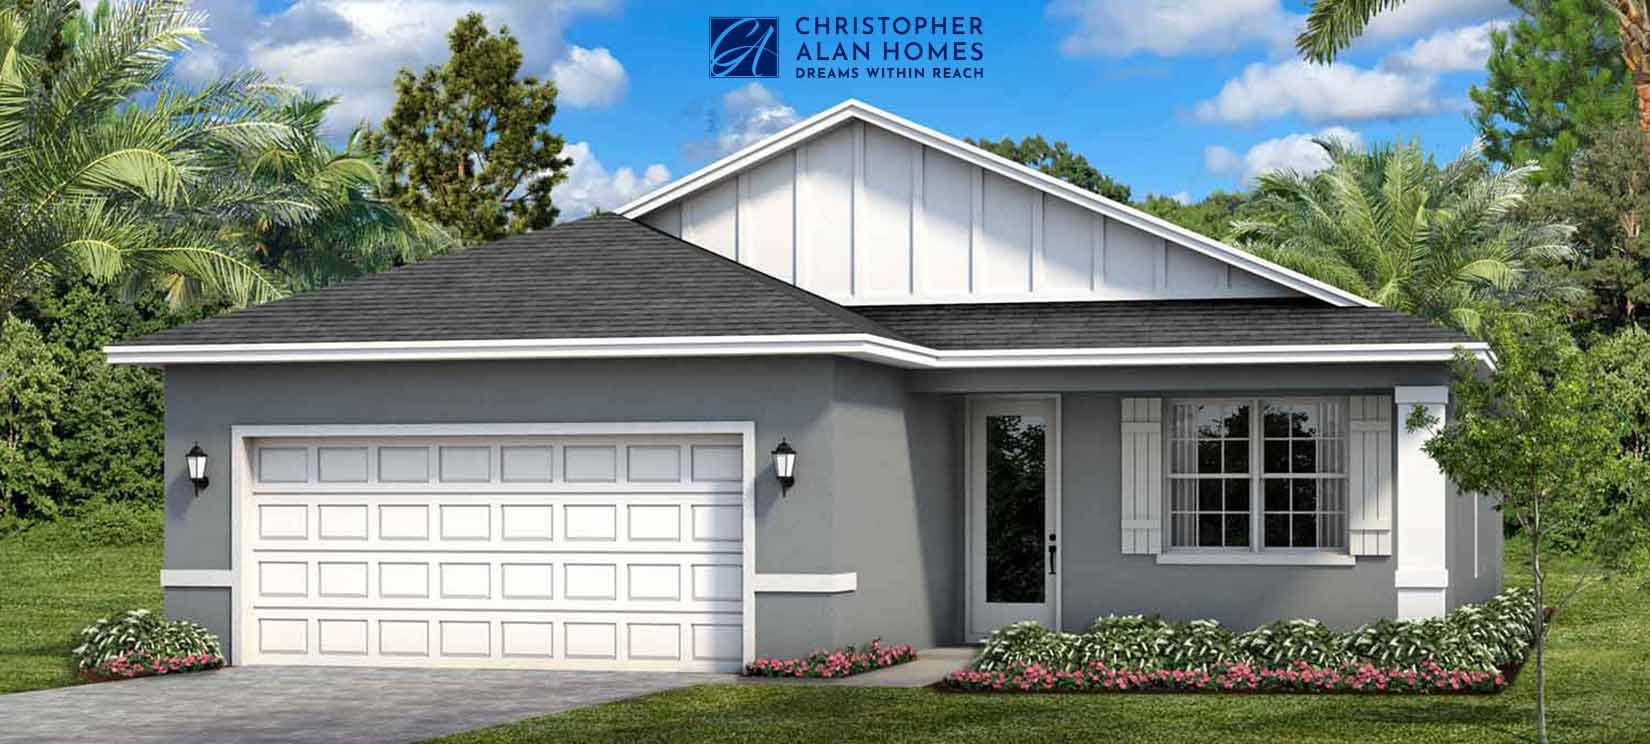 Captiva - Virtual Tour from Christopher Alan Homes